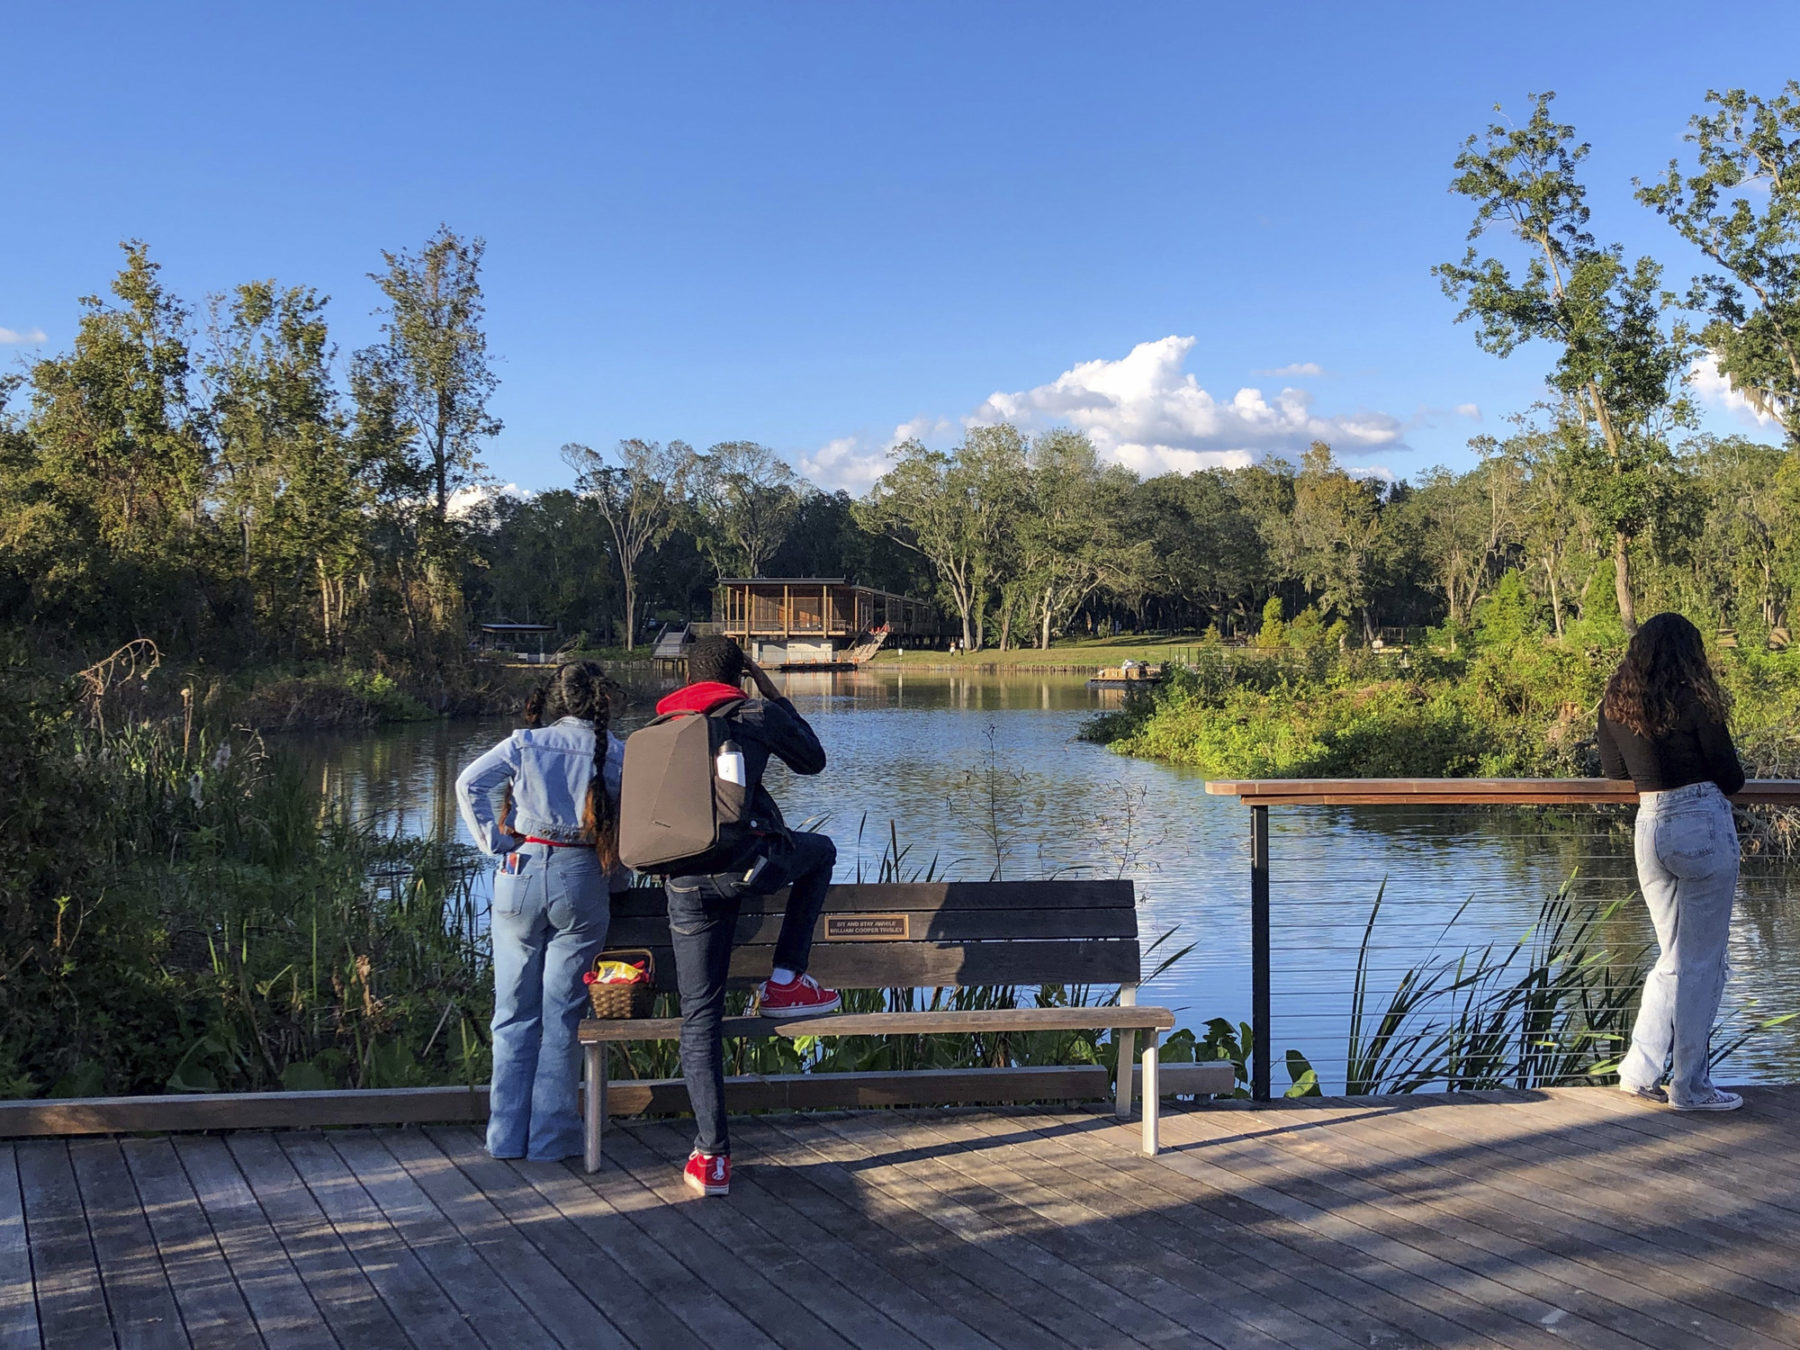 Two people stand by a bench overlooking a lagoon on a sunny day. In the distance a wooden building is visble.